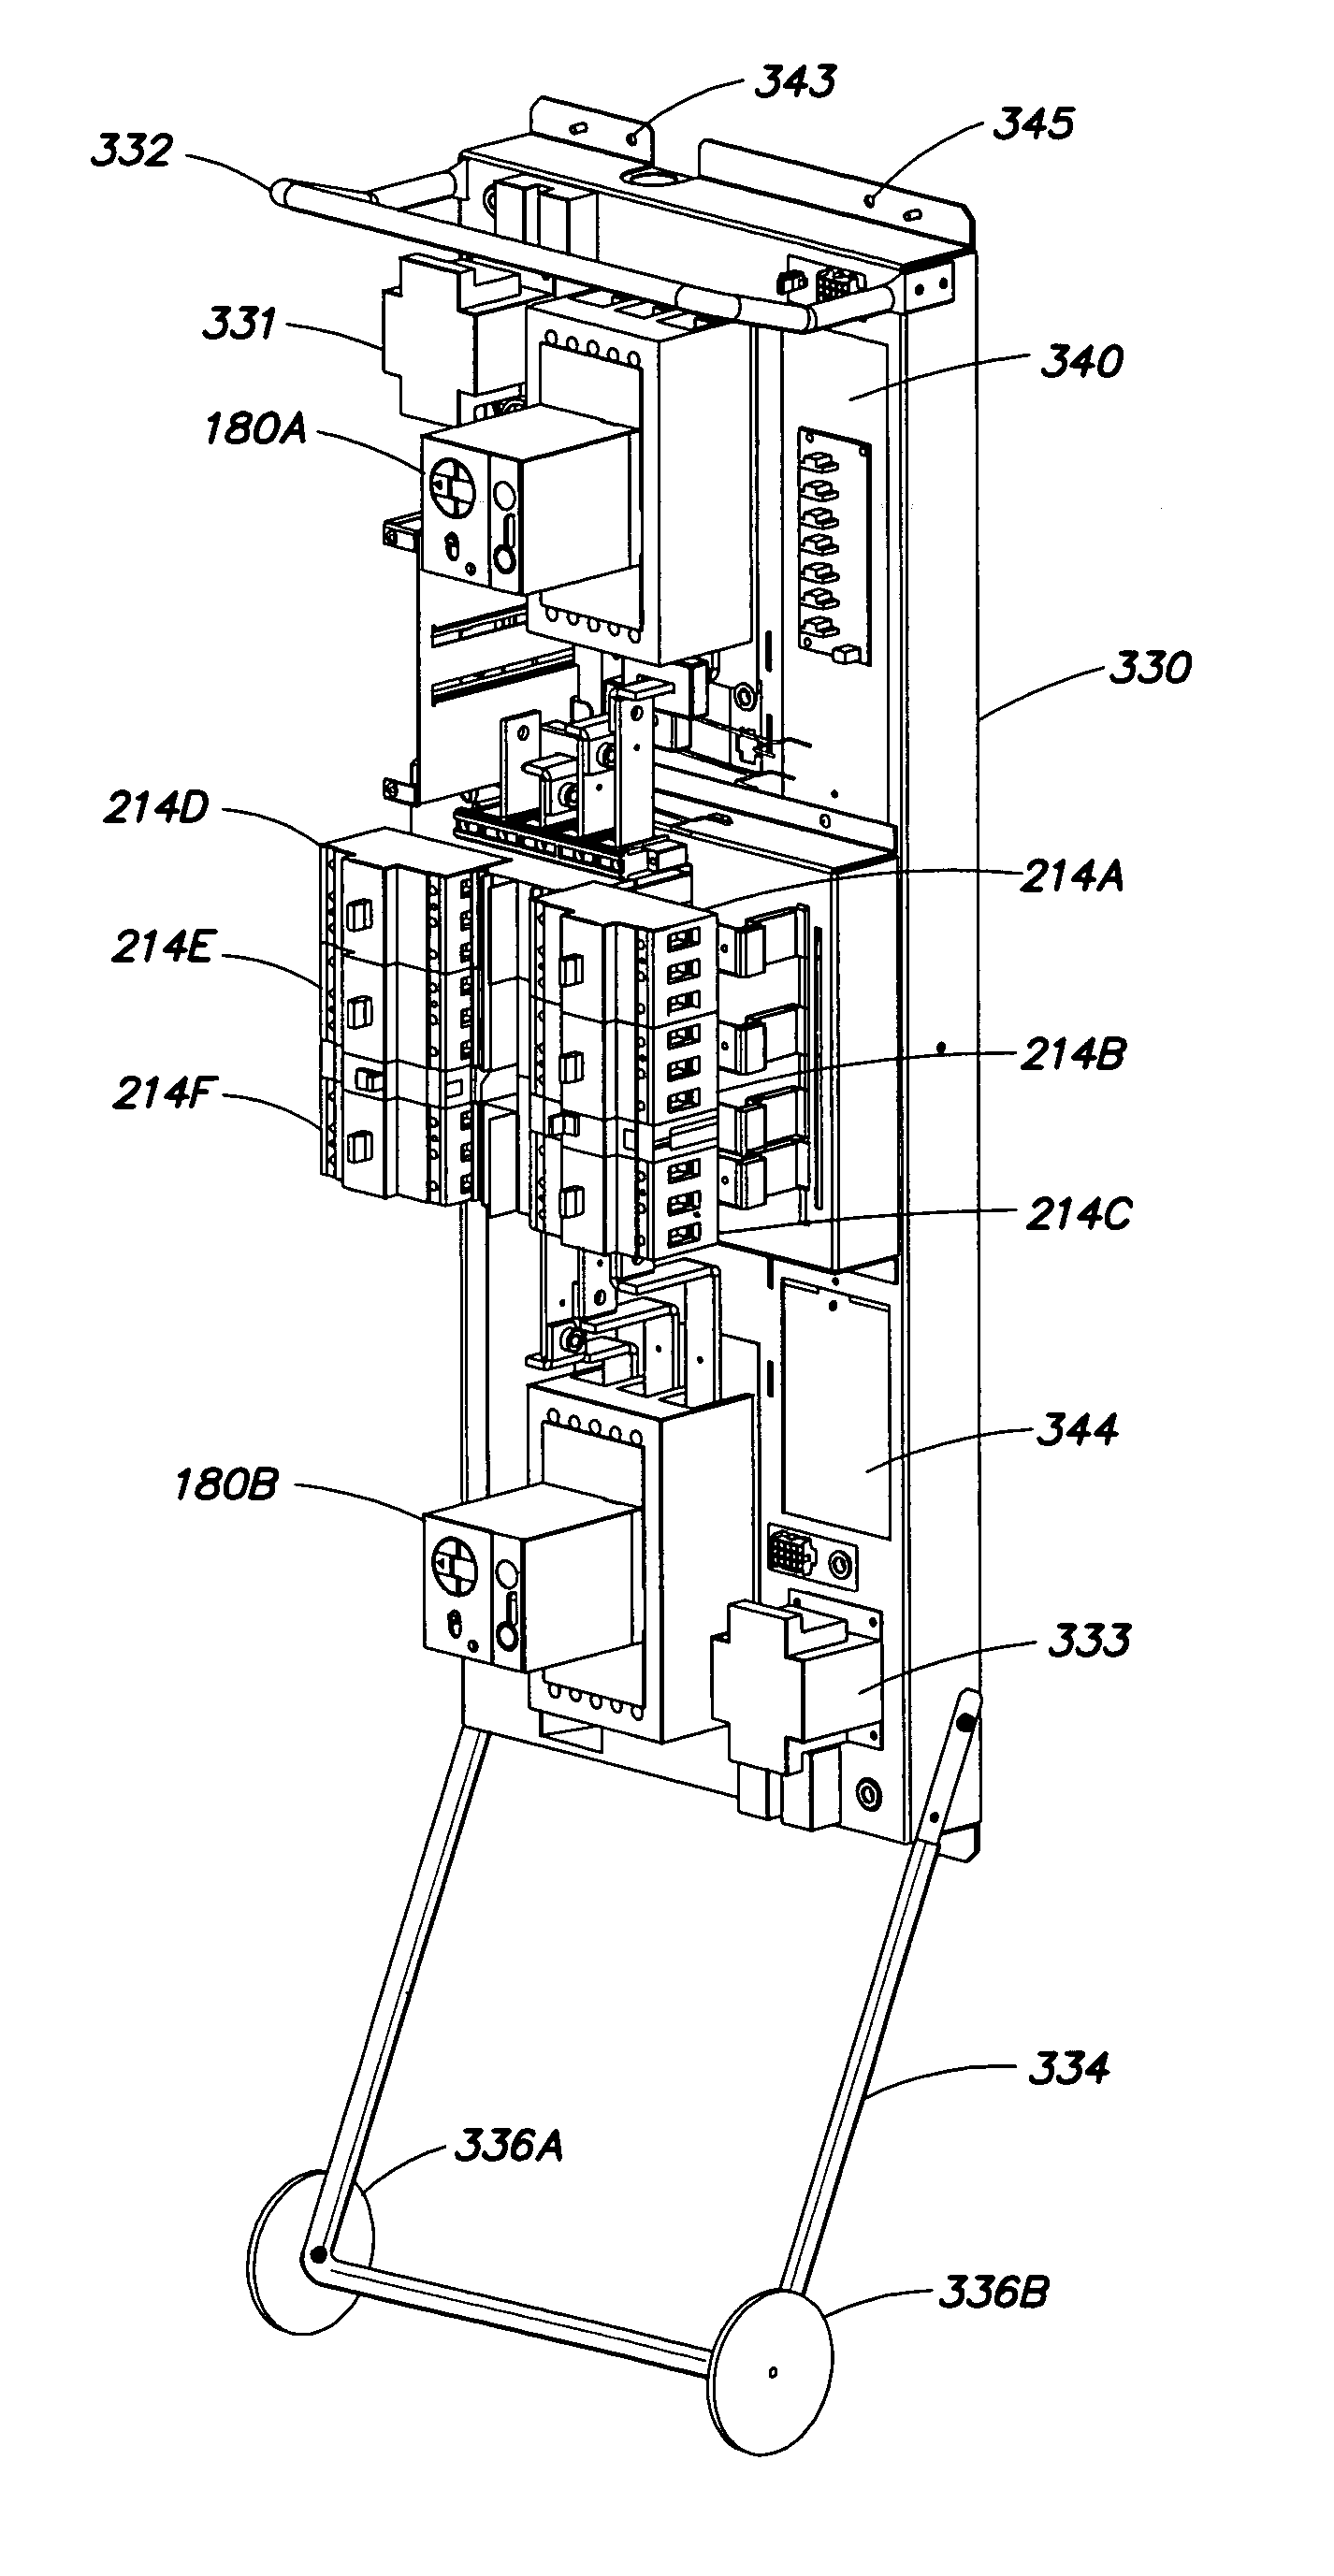 Methods and apparatus for providing and distributing standby power